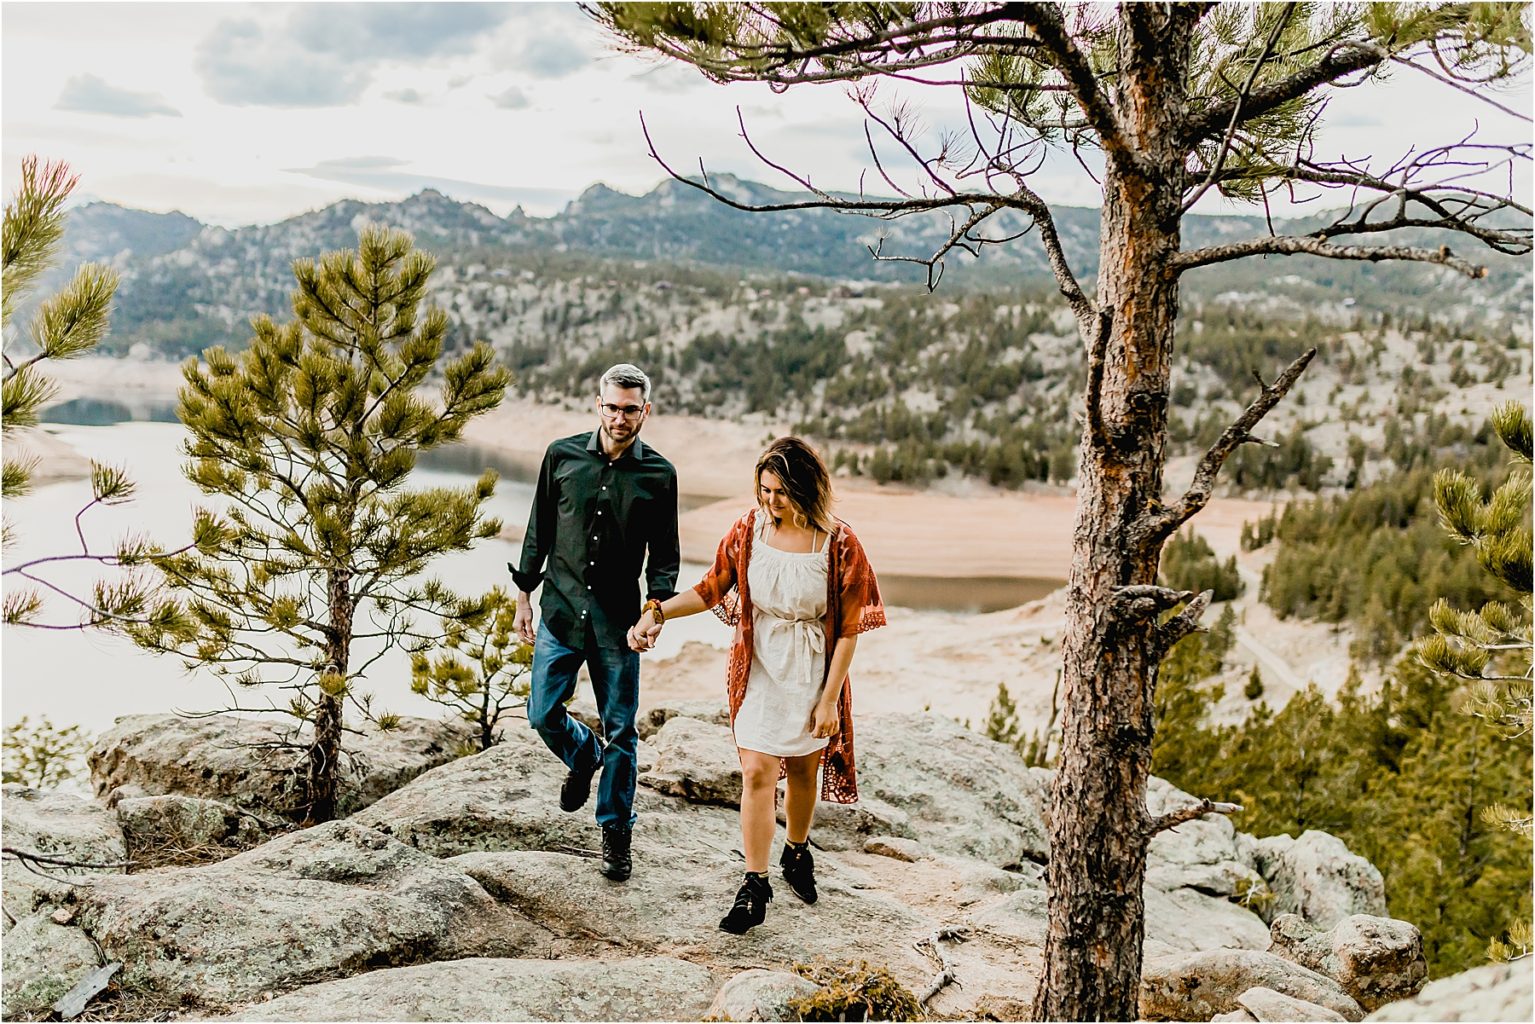 Marissa and Casey's adventure anniversary session in boulder colorado. We saw beautiful mountain and lake views, and adventured on the rocks at a perfect overlook.